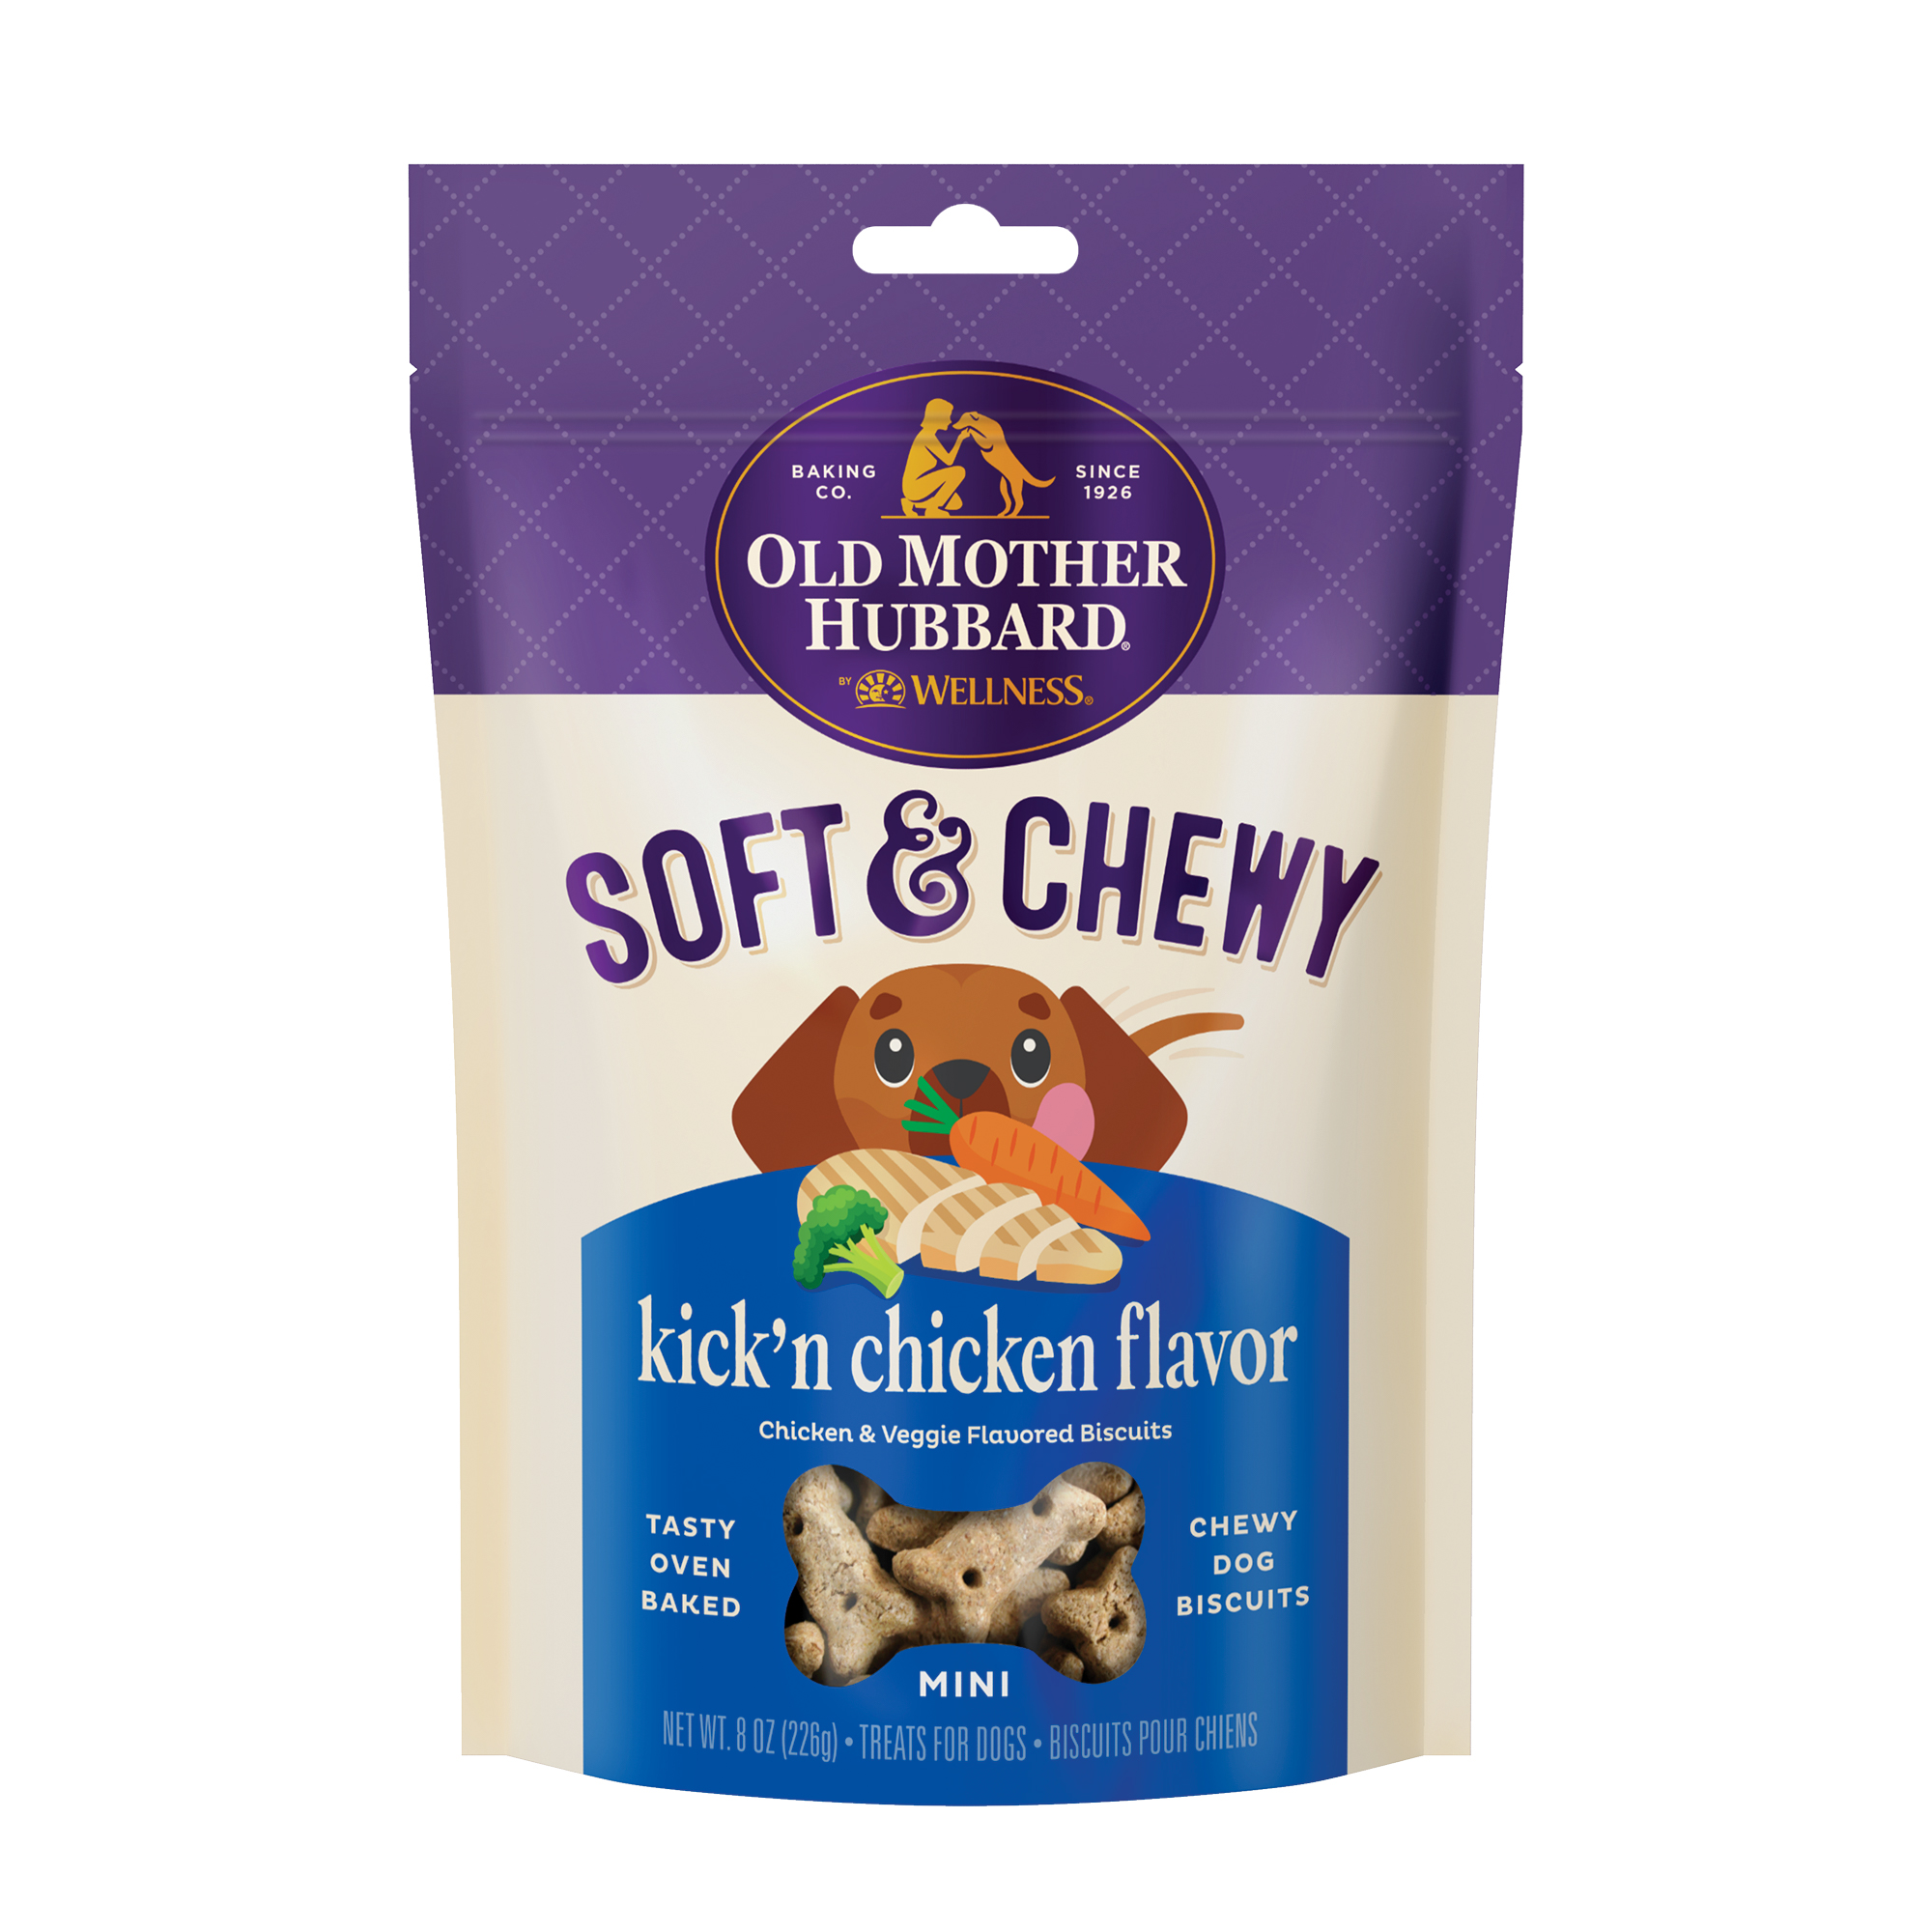 Old Mother Hubbard Soft & Chewy Kick’n’Chicken Flavor